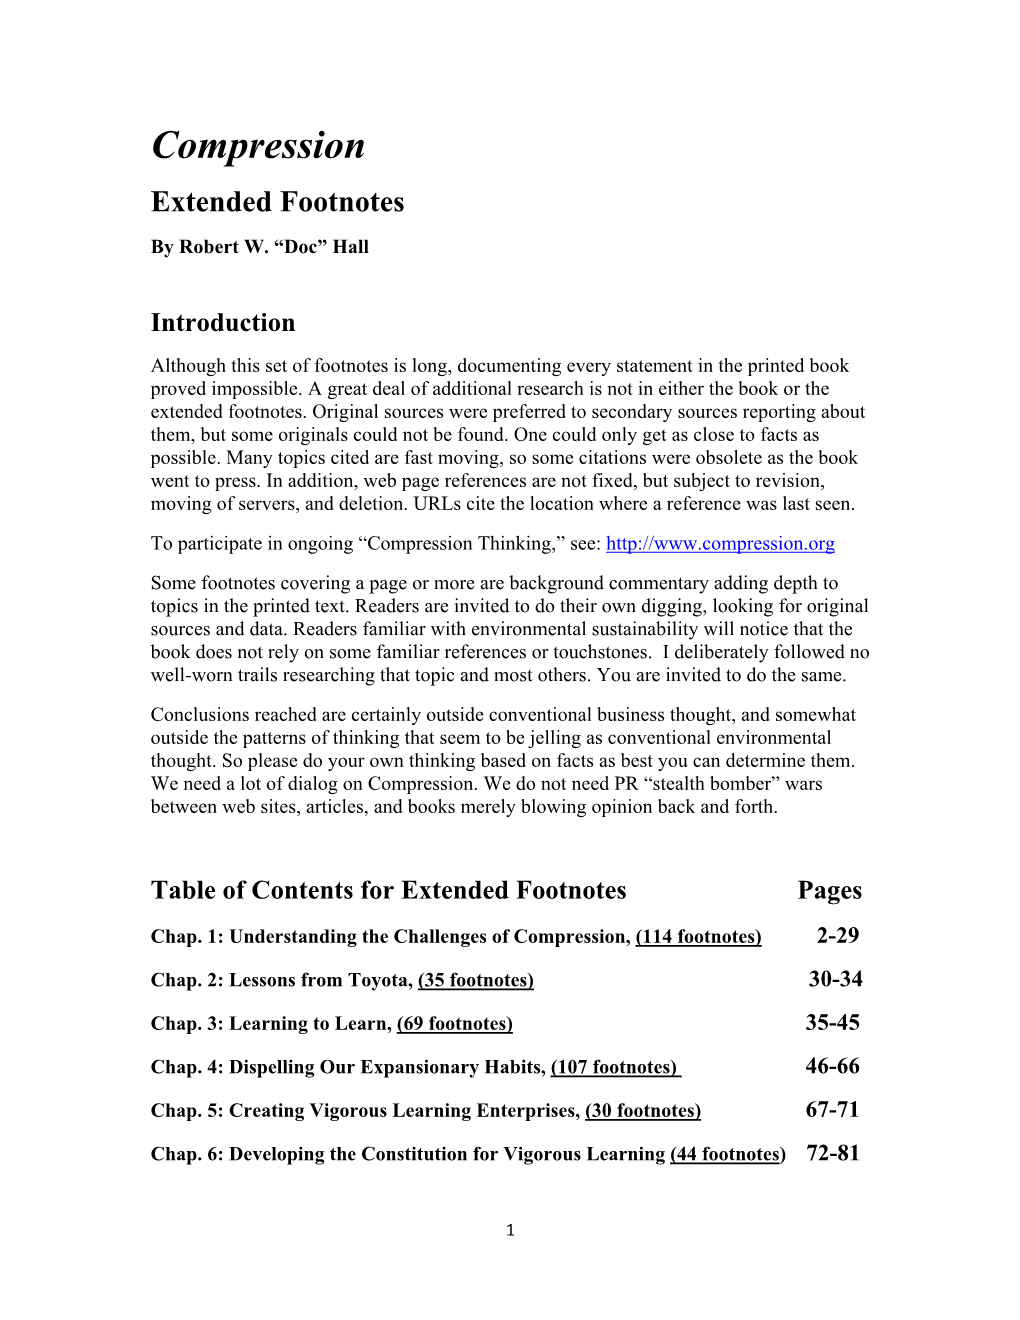 Compression Extended Footnotes by Robert W